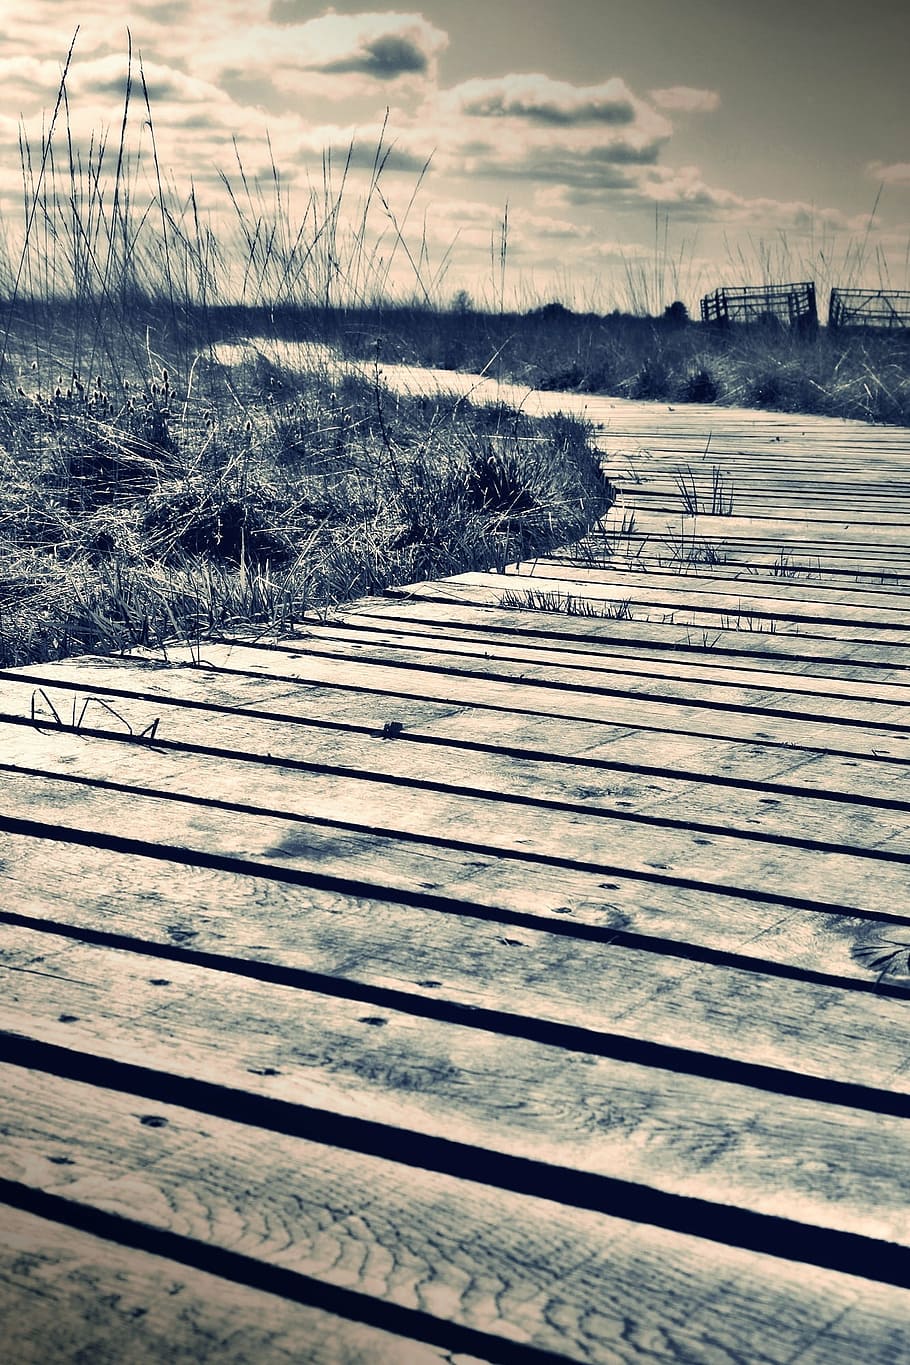 filtered photography of wooden dock overlooking grassy fieldds